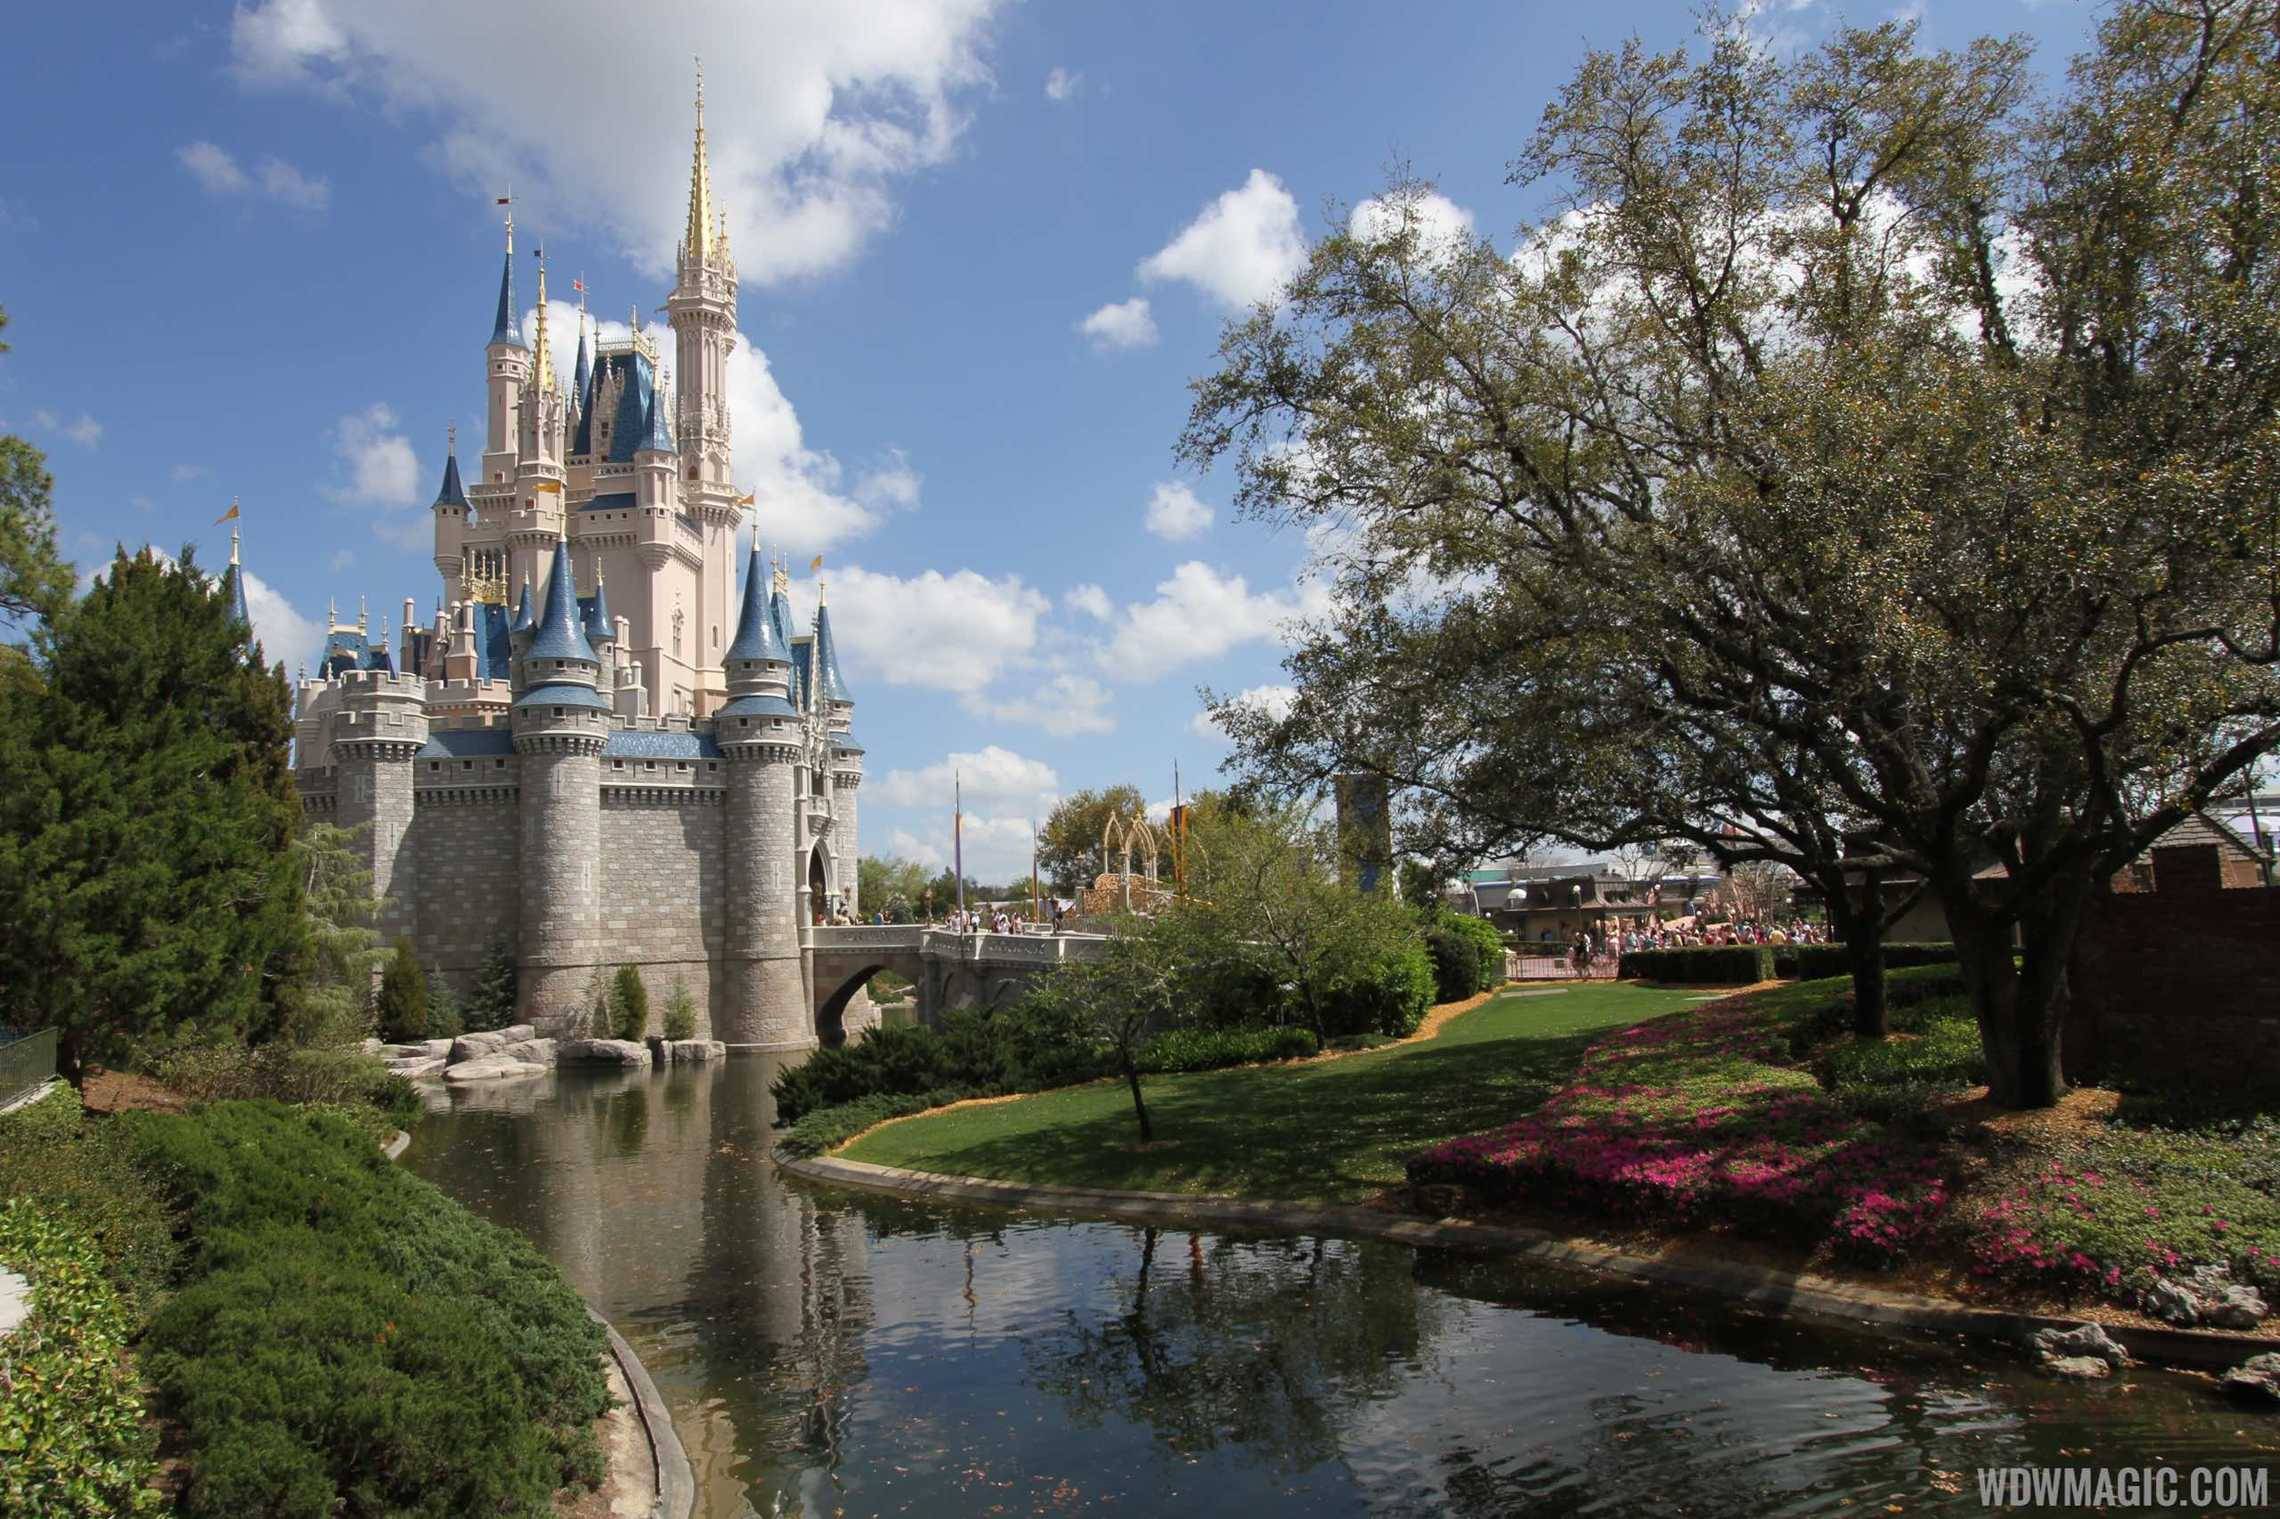 Disney Early Morning returns to the Magic Kingdom this fall 